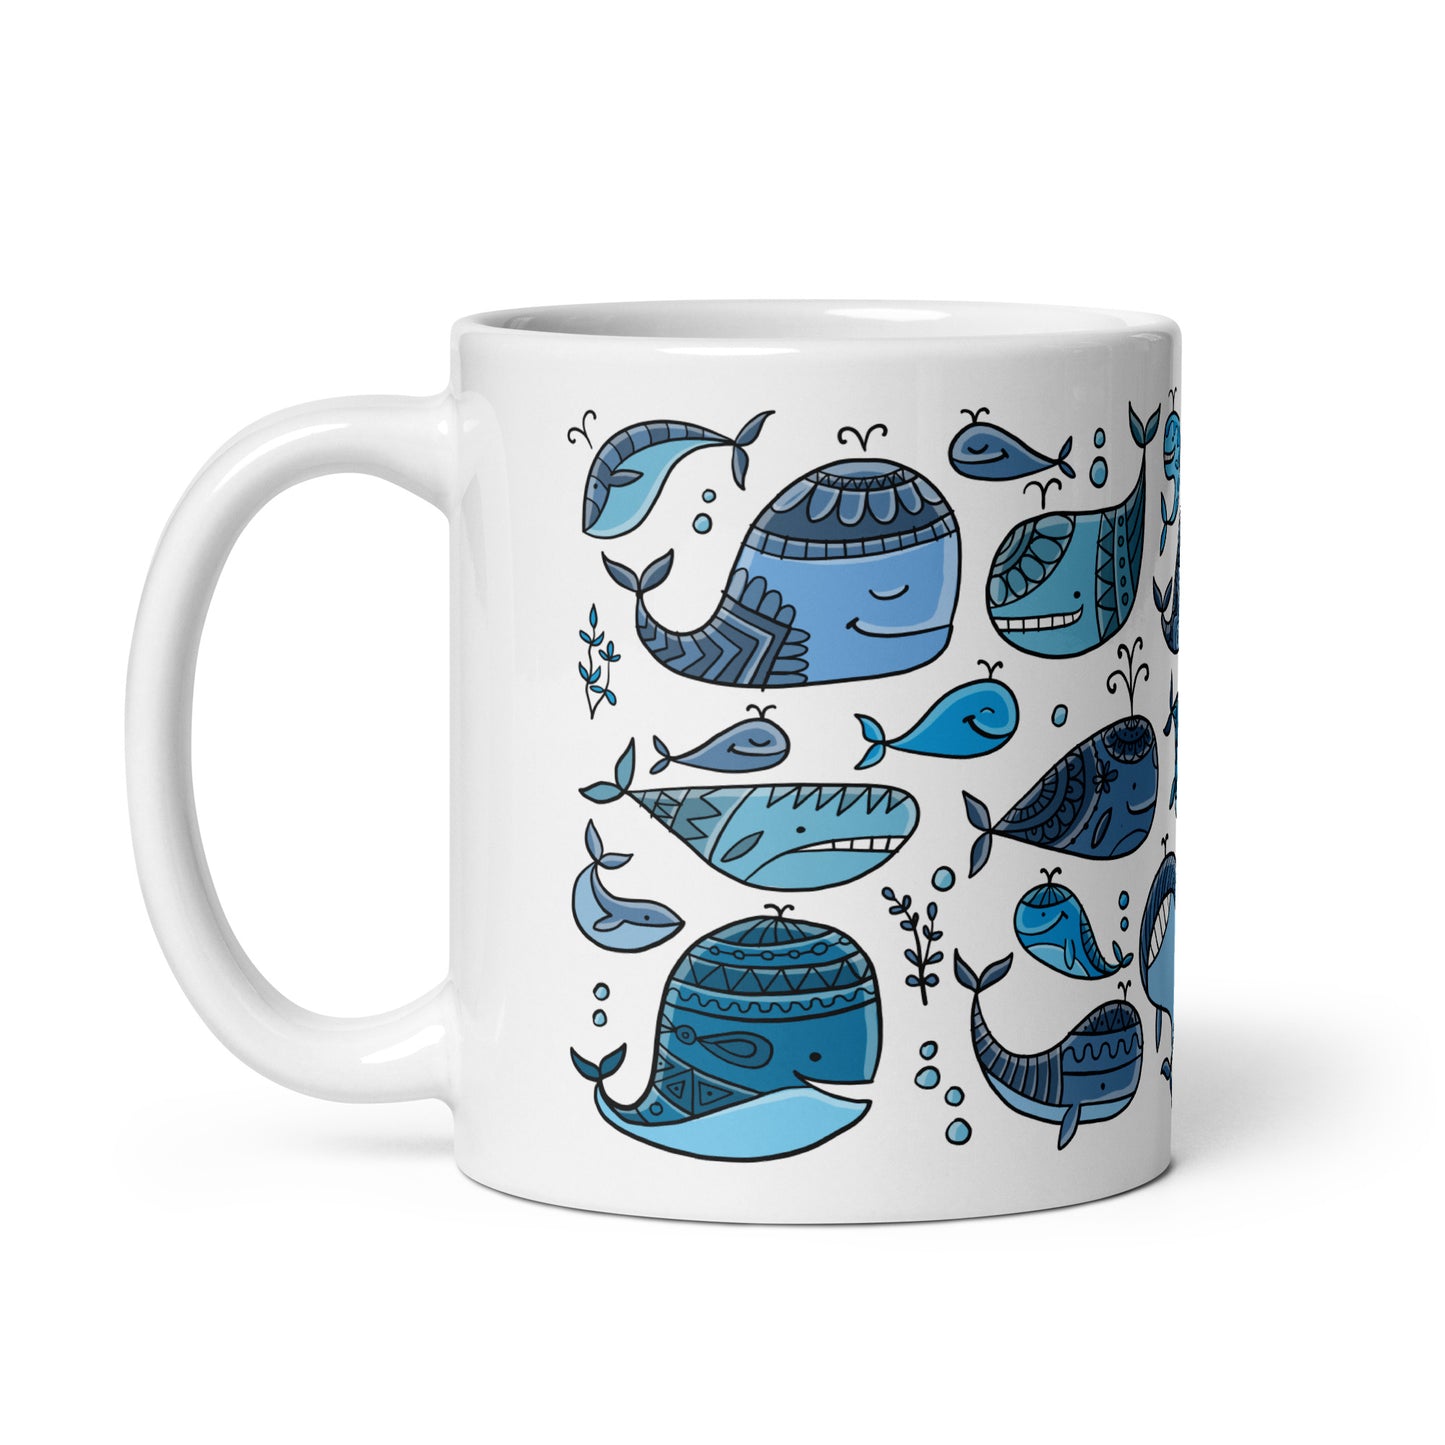 A charming ceramic gift mug 11 oz celebrating Whales Day. Funny whales families. Perfect for whale enthusiasts and marine life lovers.